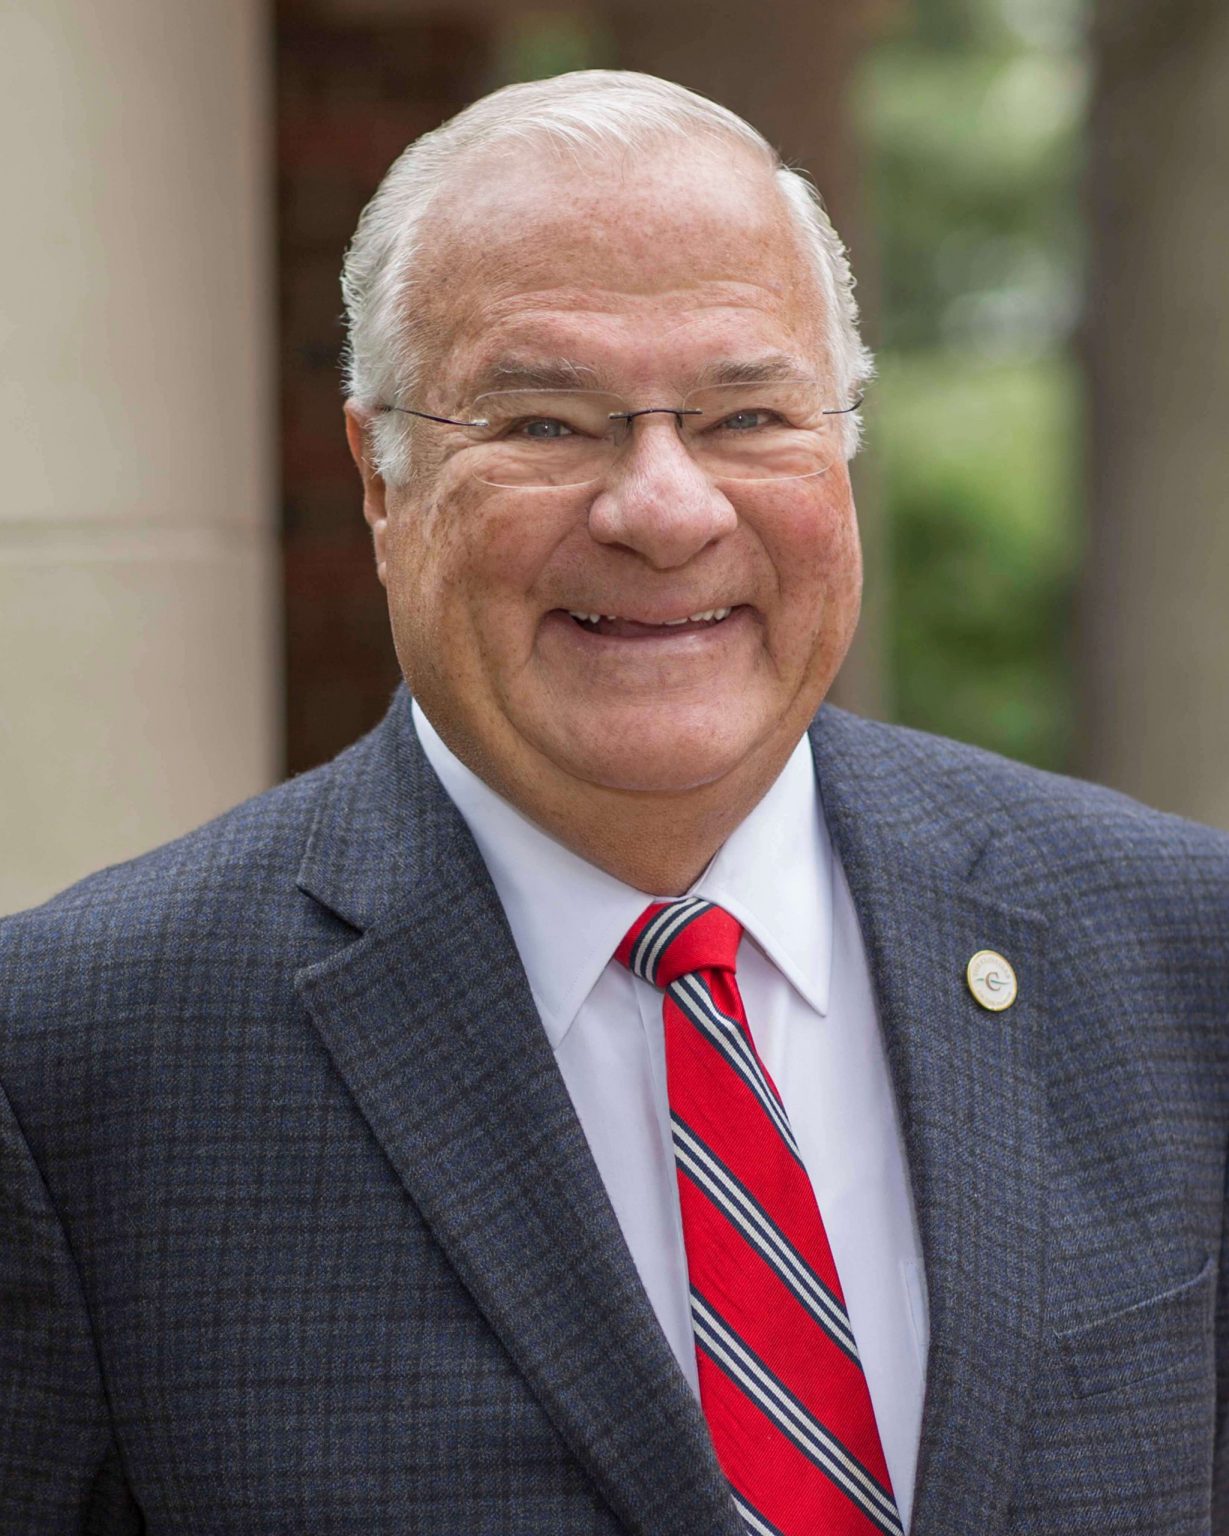 Joe Ricketts, the Founder and CEO of Opportunity Education